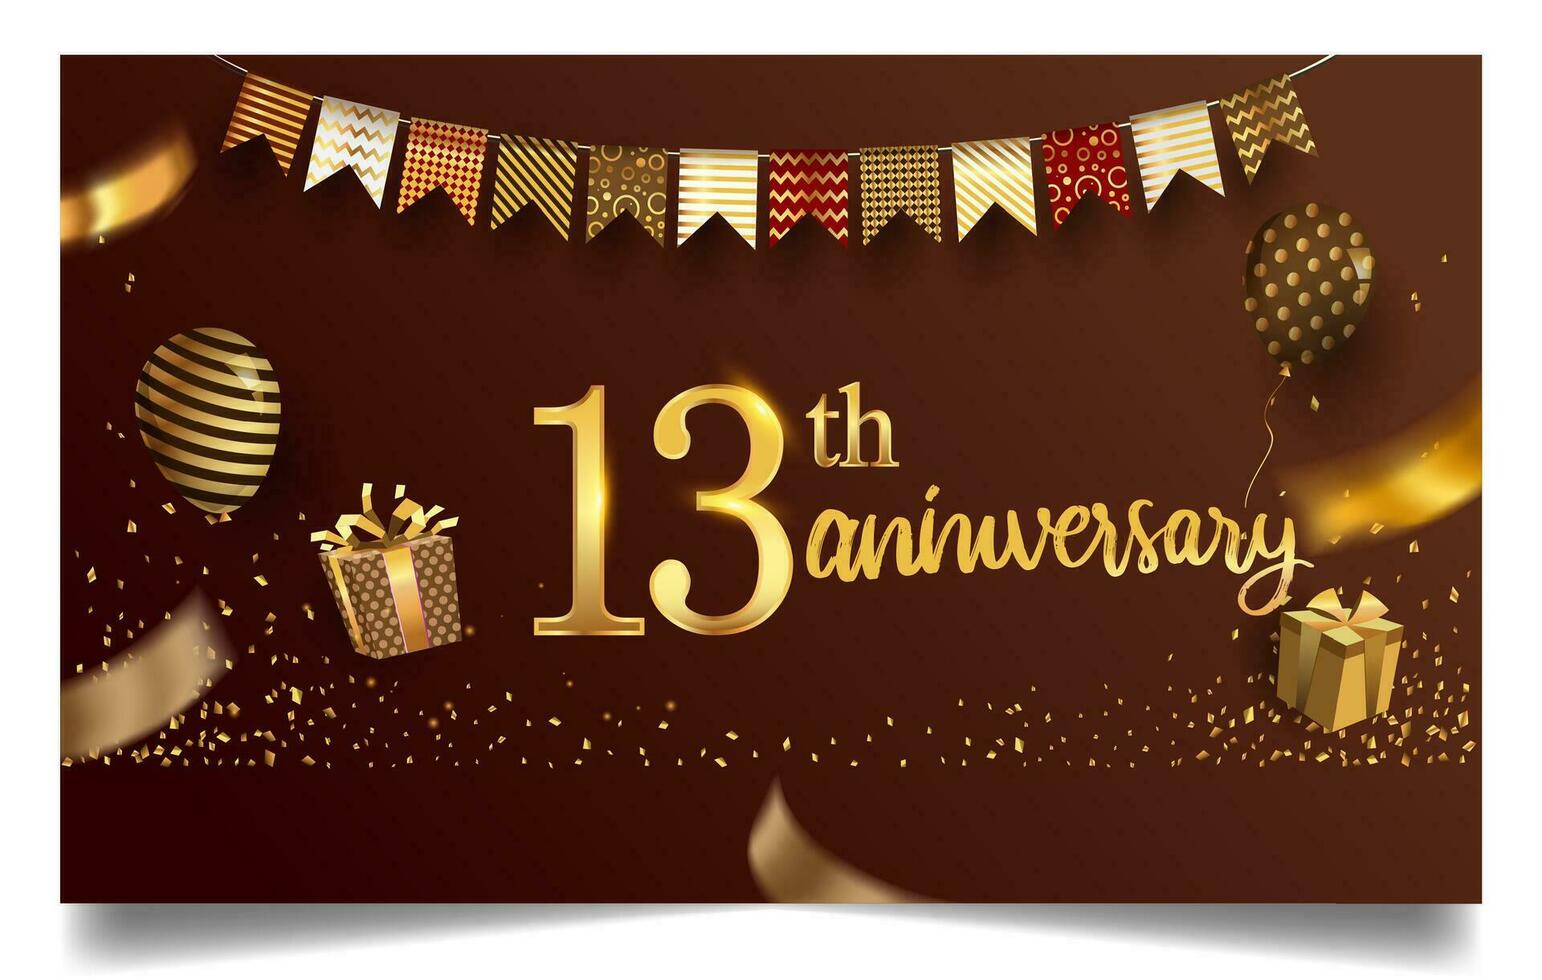 50th years anniversary design for greeting cards and invitation, with balloon, confetti and gift box, elegant design with gold and dark color, design template for birthday celebration. vector